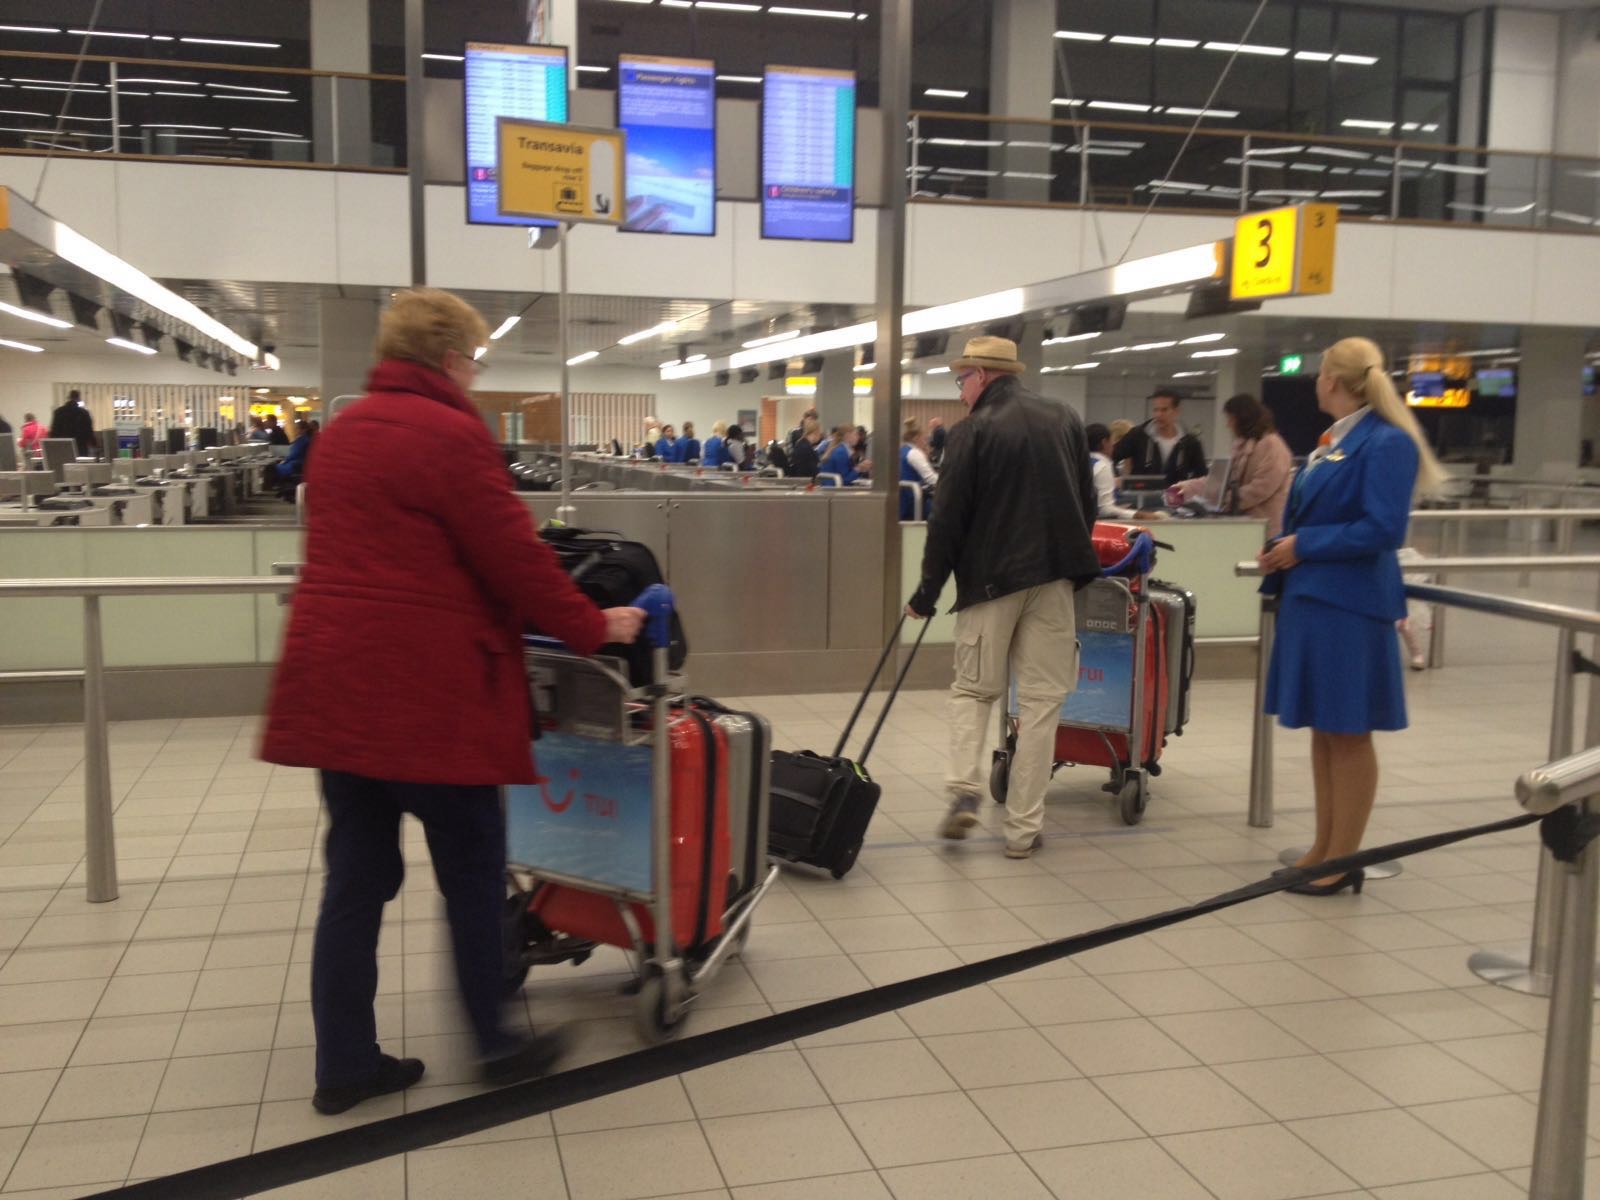 At Schiphol airport quite early in the morning